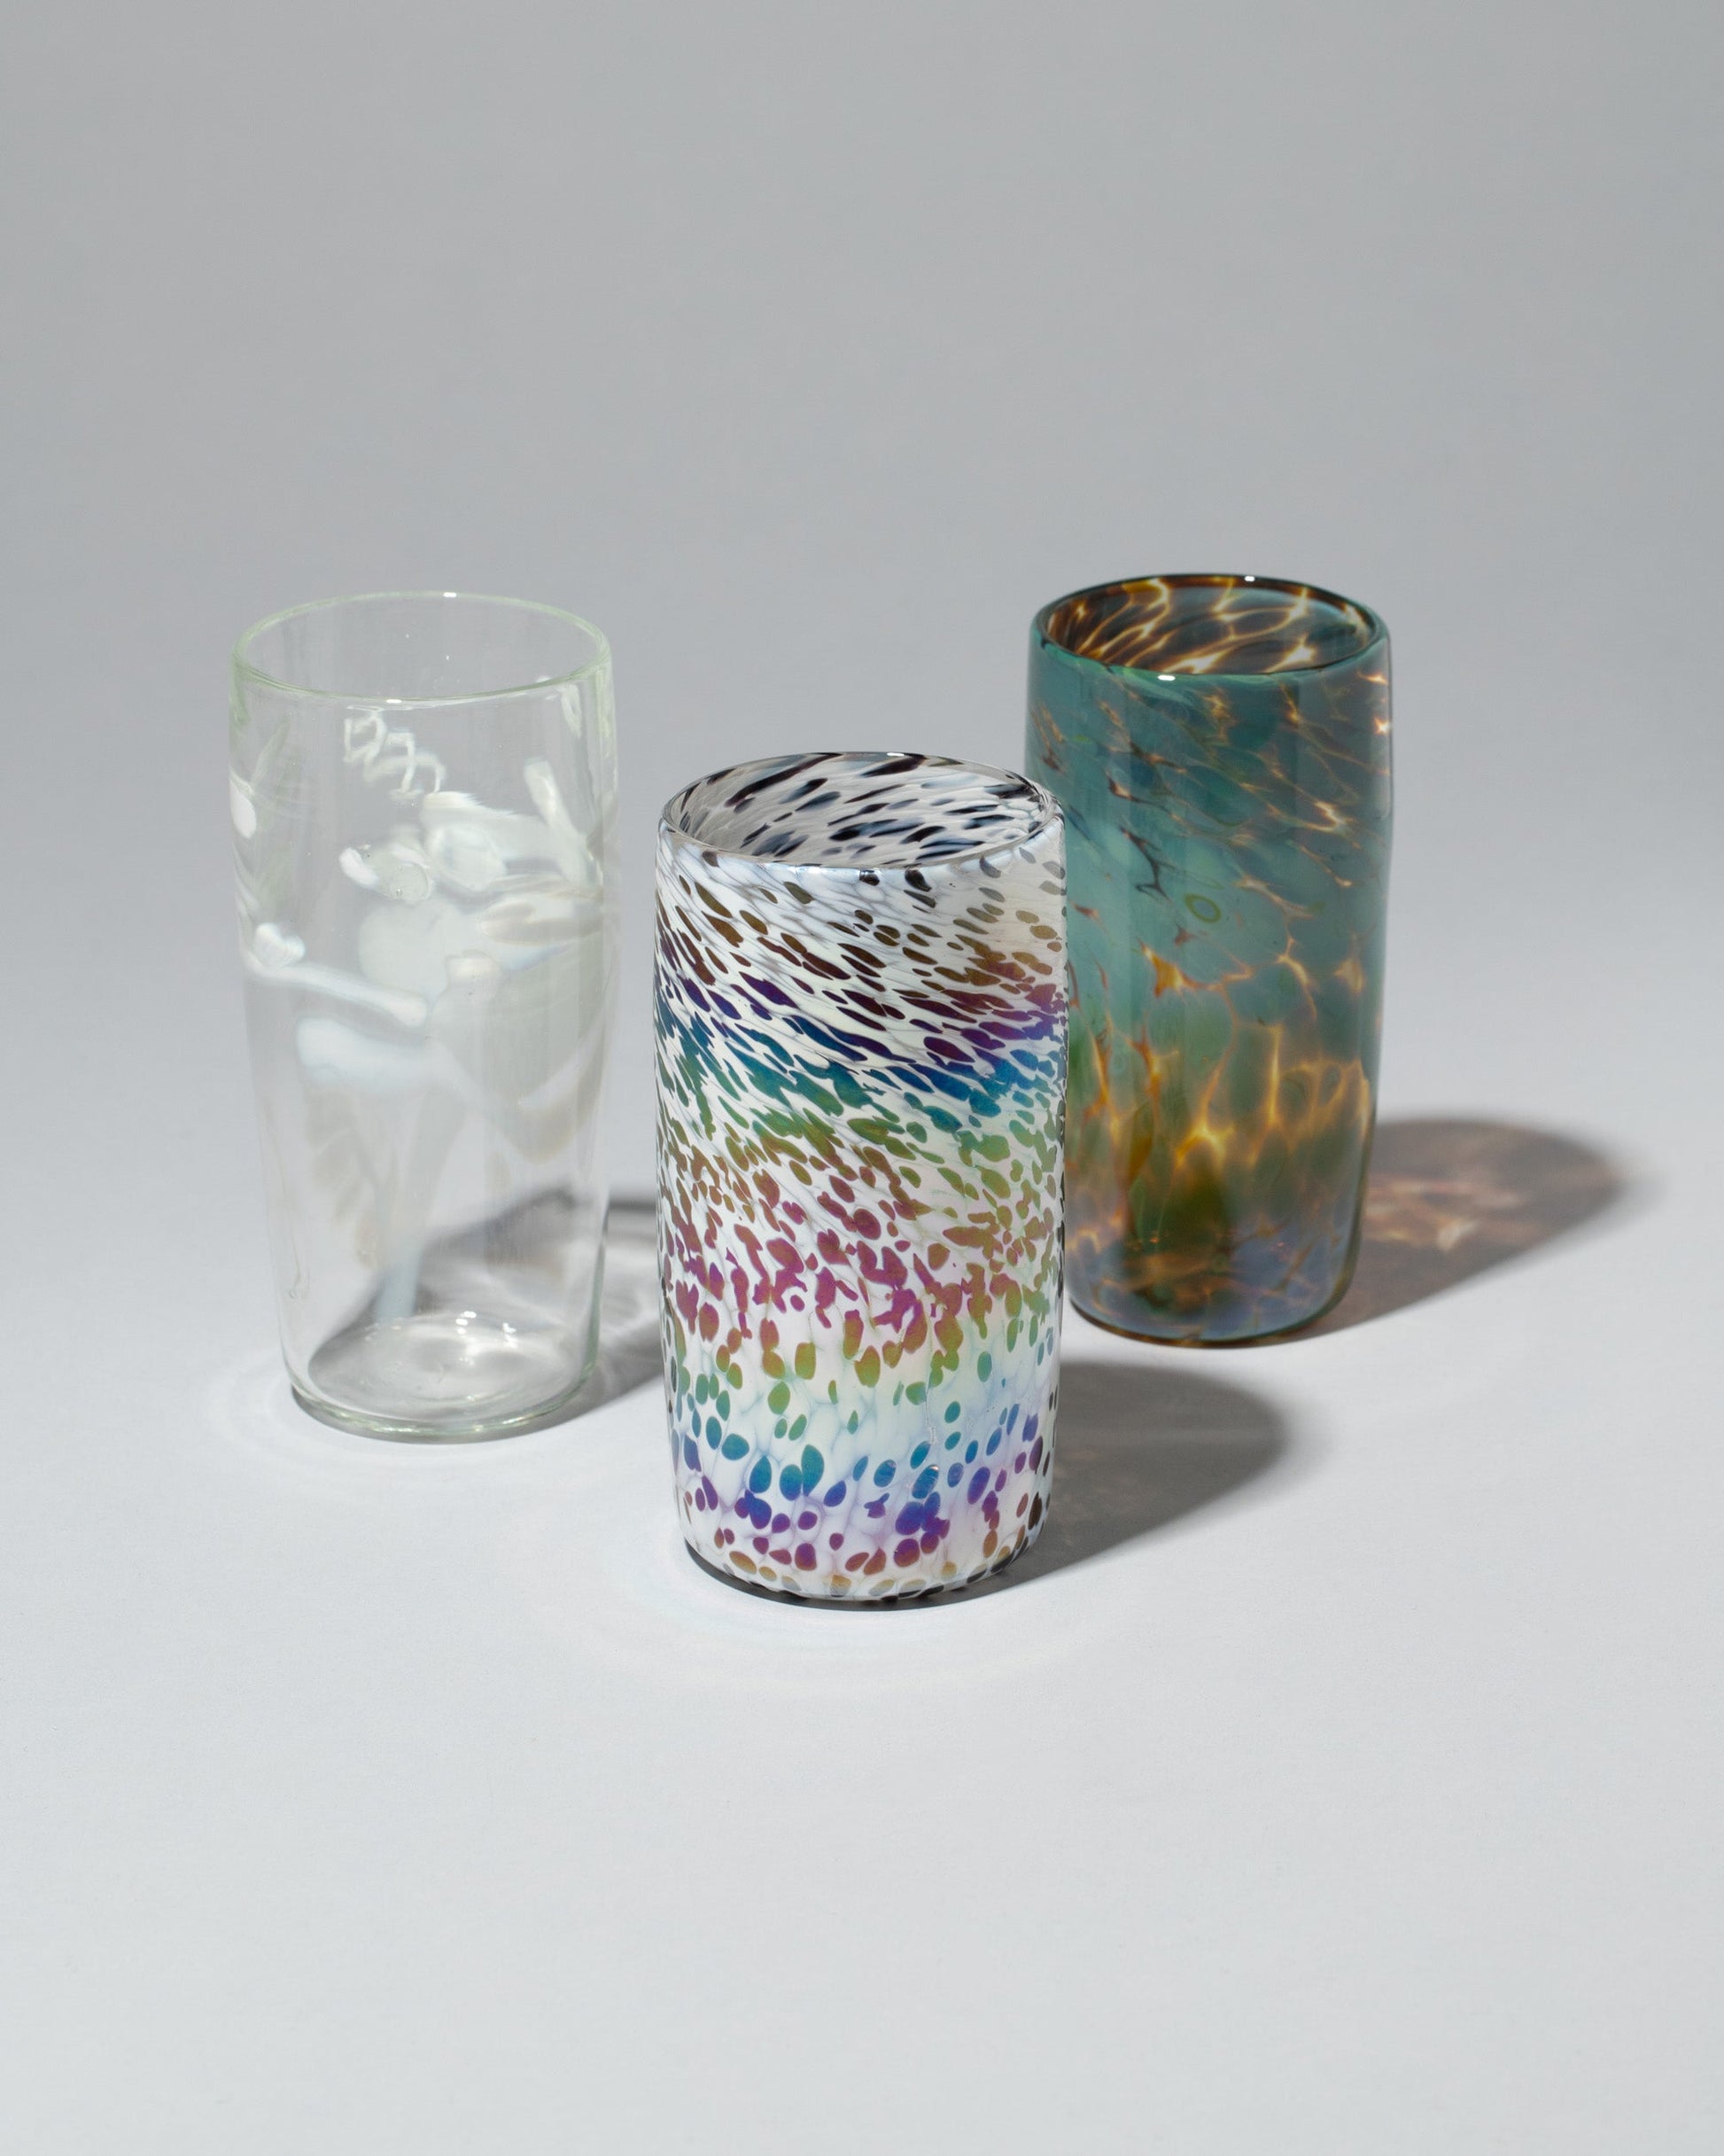 Closeup details of a group of Sirius Glassworks Disco Dalmatian Tumblers on light color background.